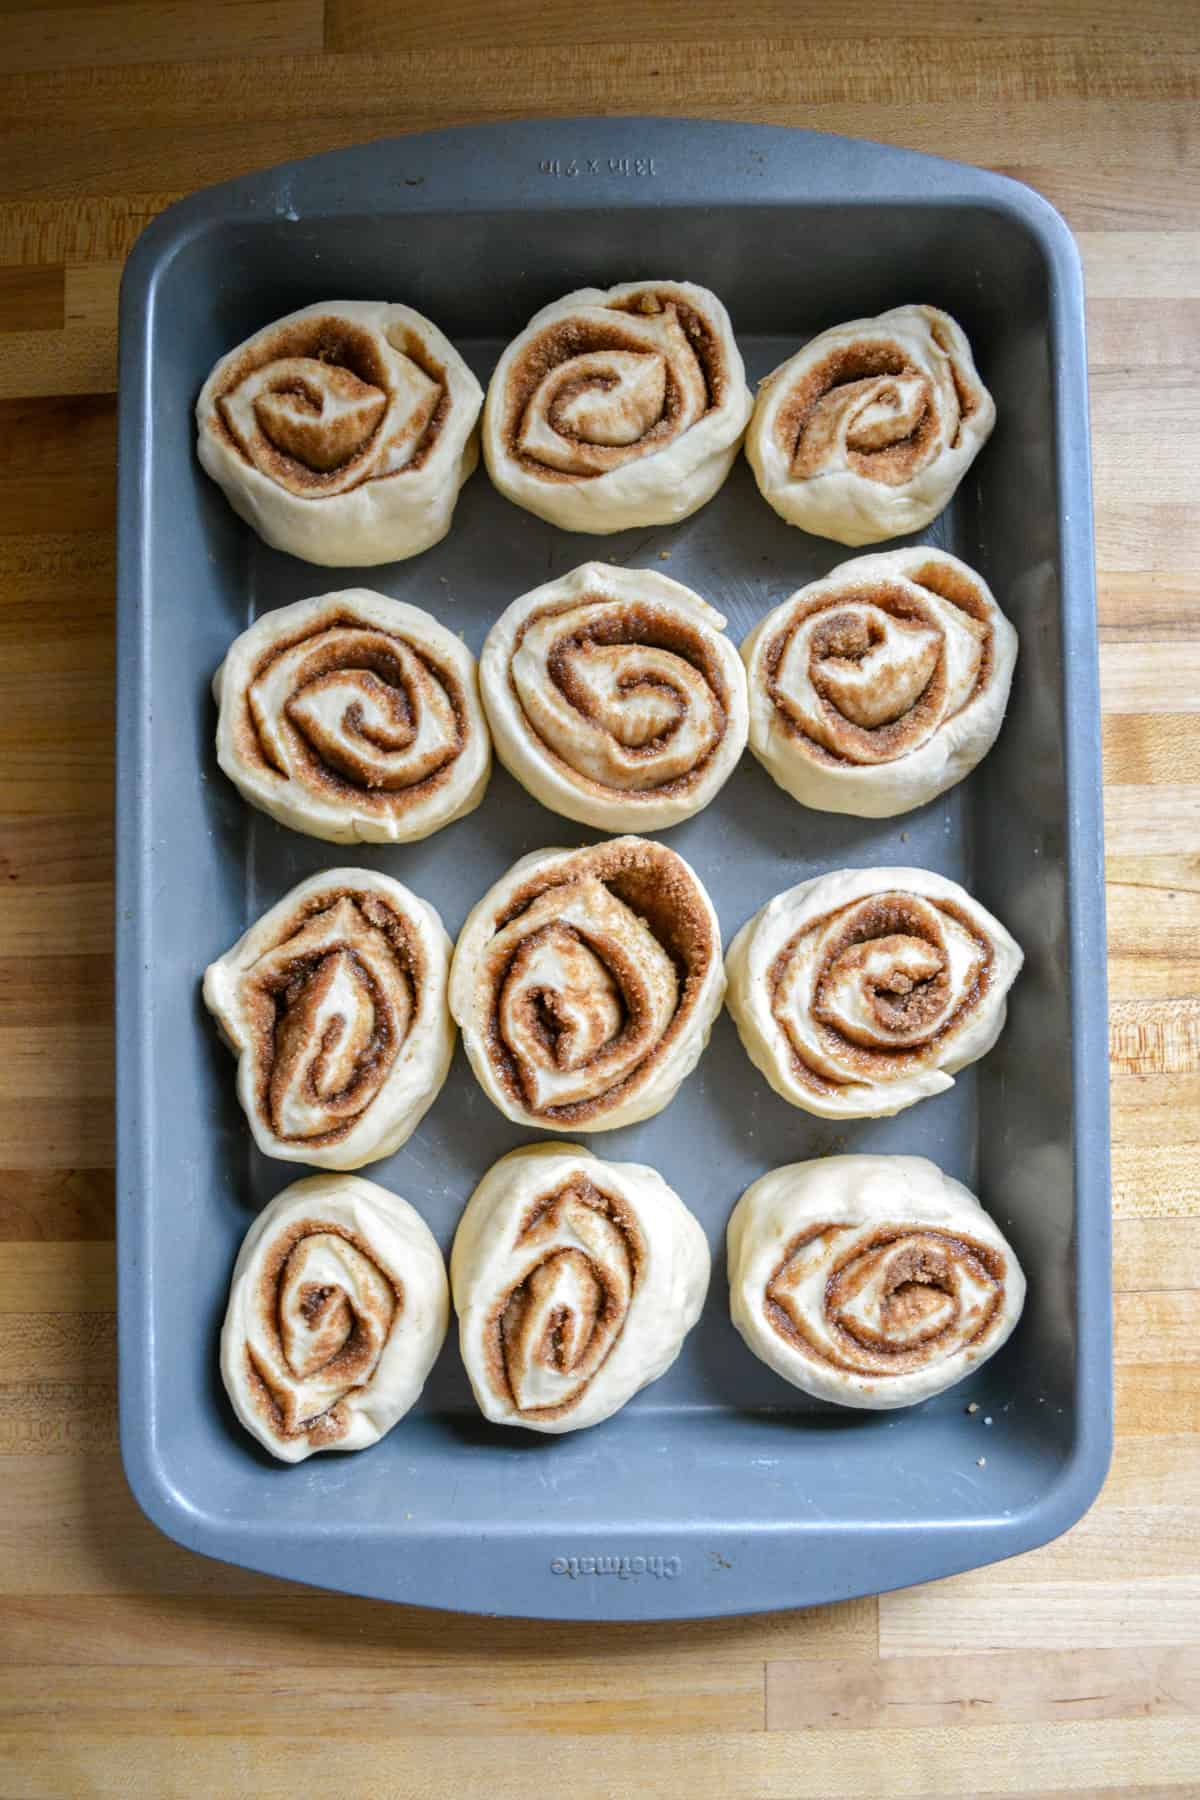 Vegan cinnamon rolls cut and placed into a baking pan.